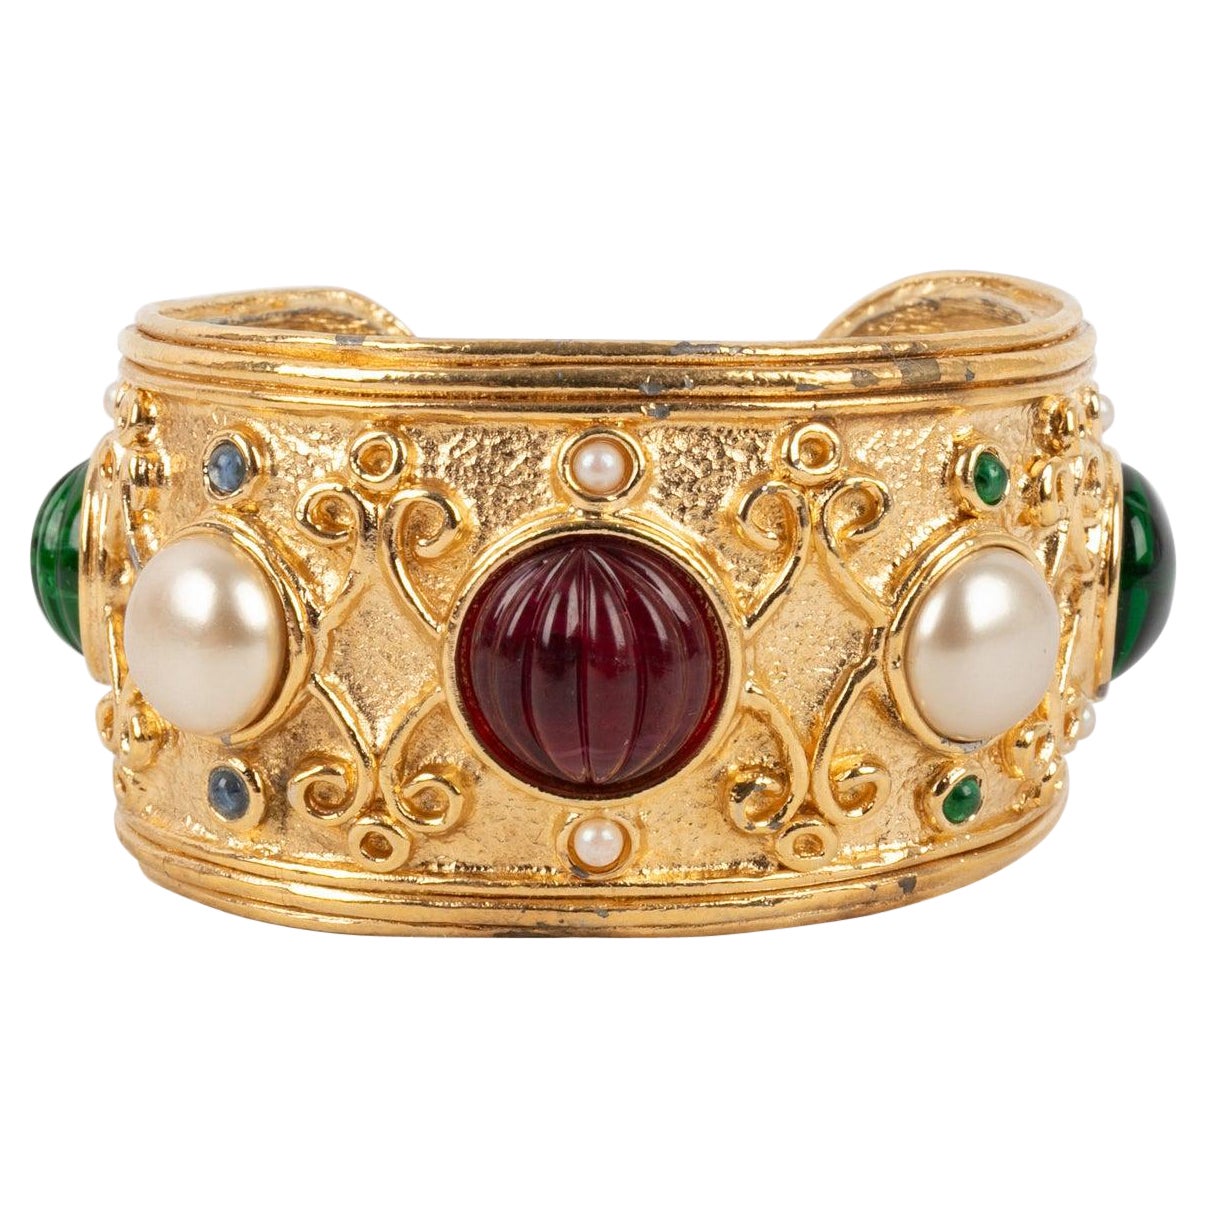 Christian Dior Golden Metal Bracelet Ornamented with Pearls and Glass Paste